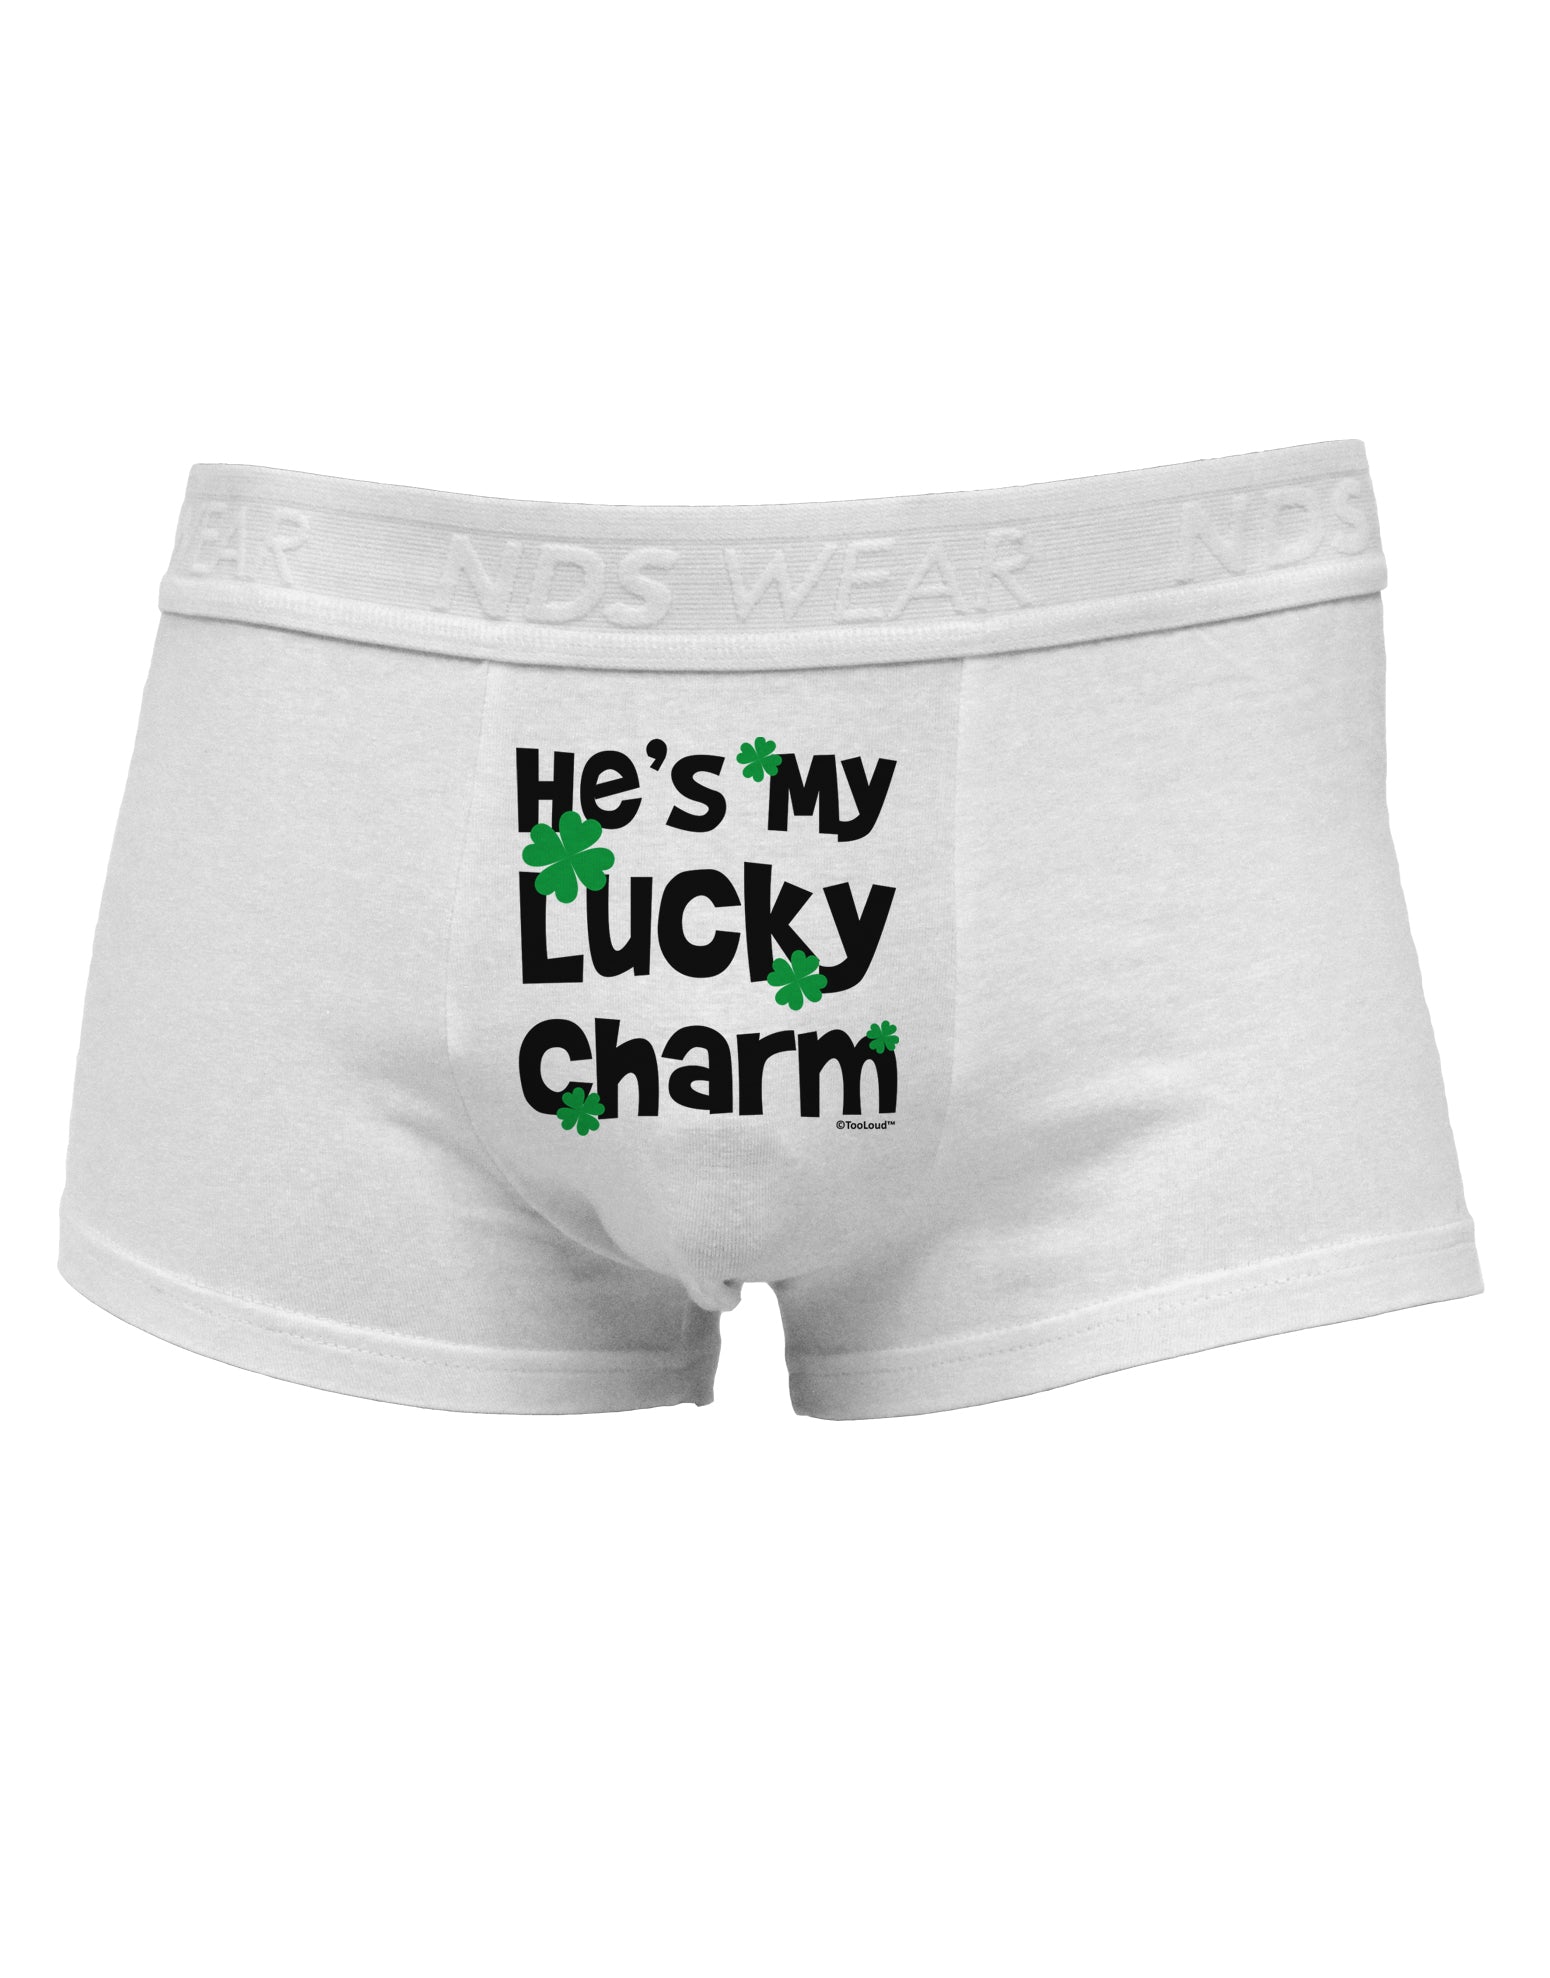 He's My Lucky Charm - Matching Couples Design Mens NDS Wear Boxer